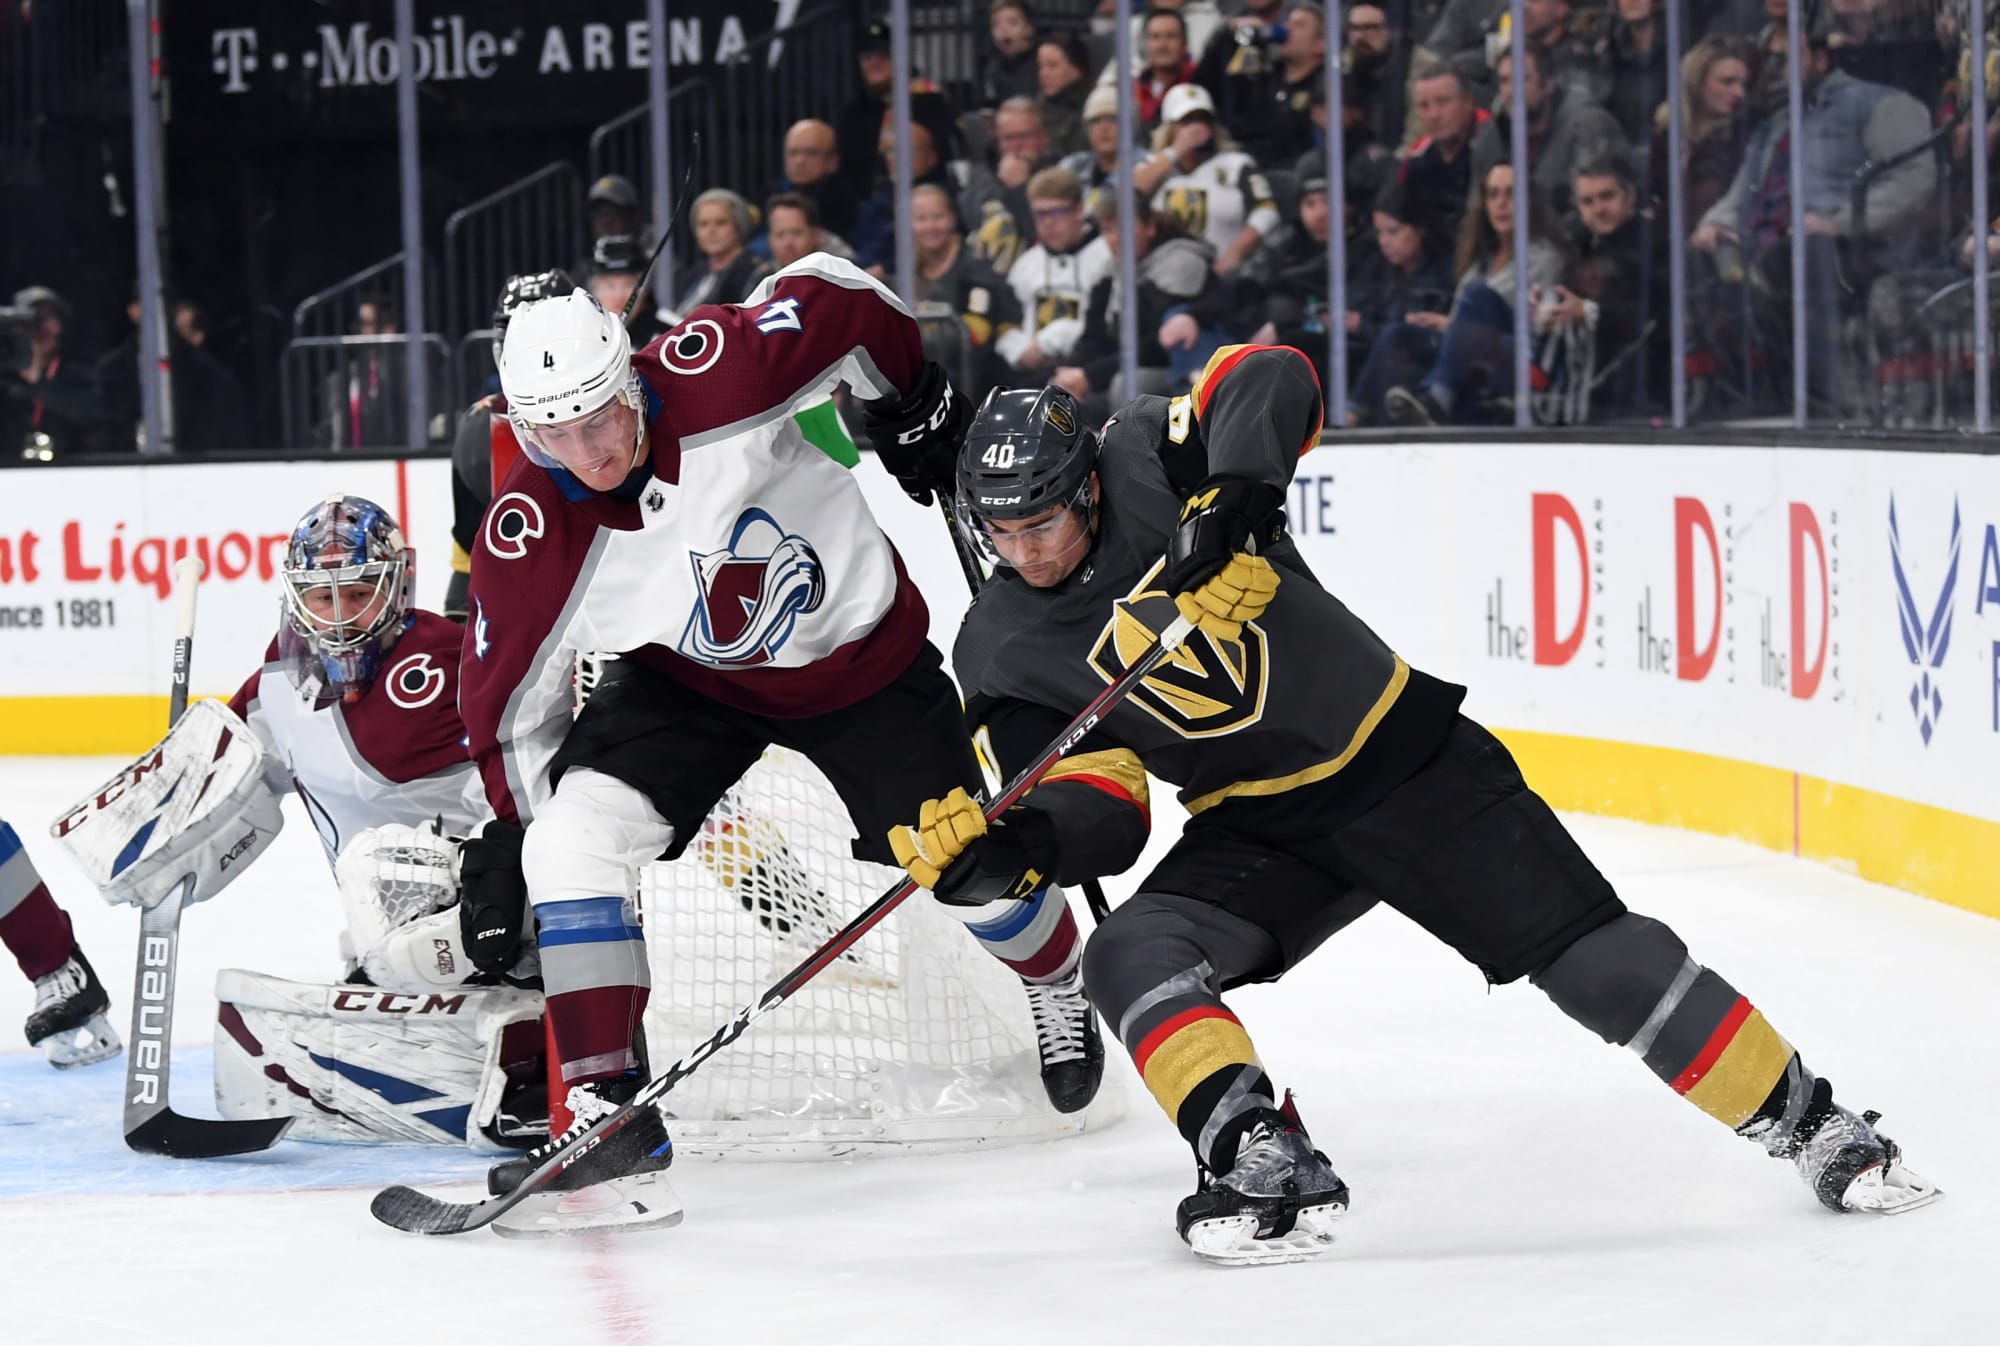 Colorado Avalanche Need to Find their Defensive Play